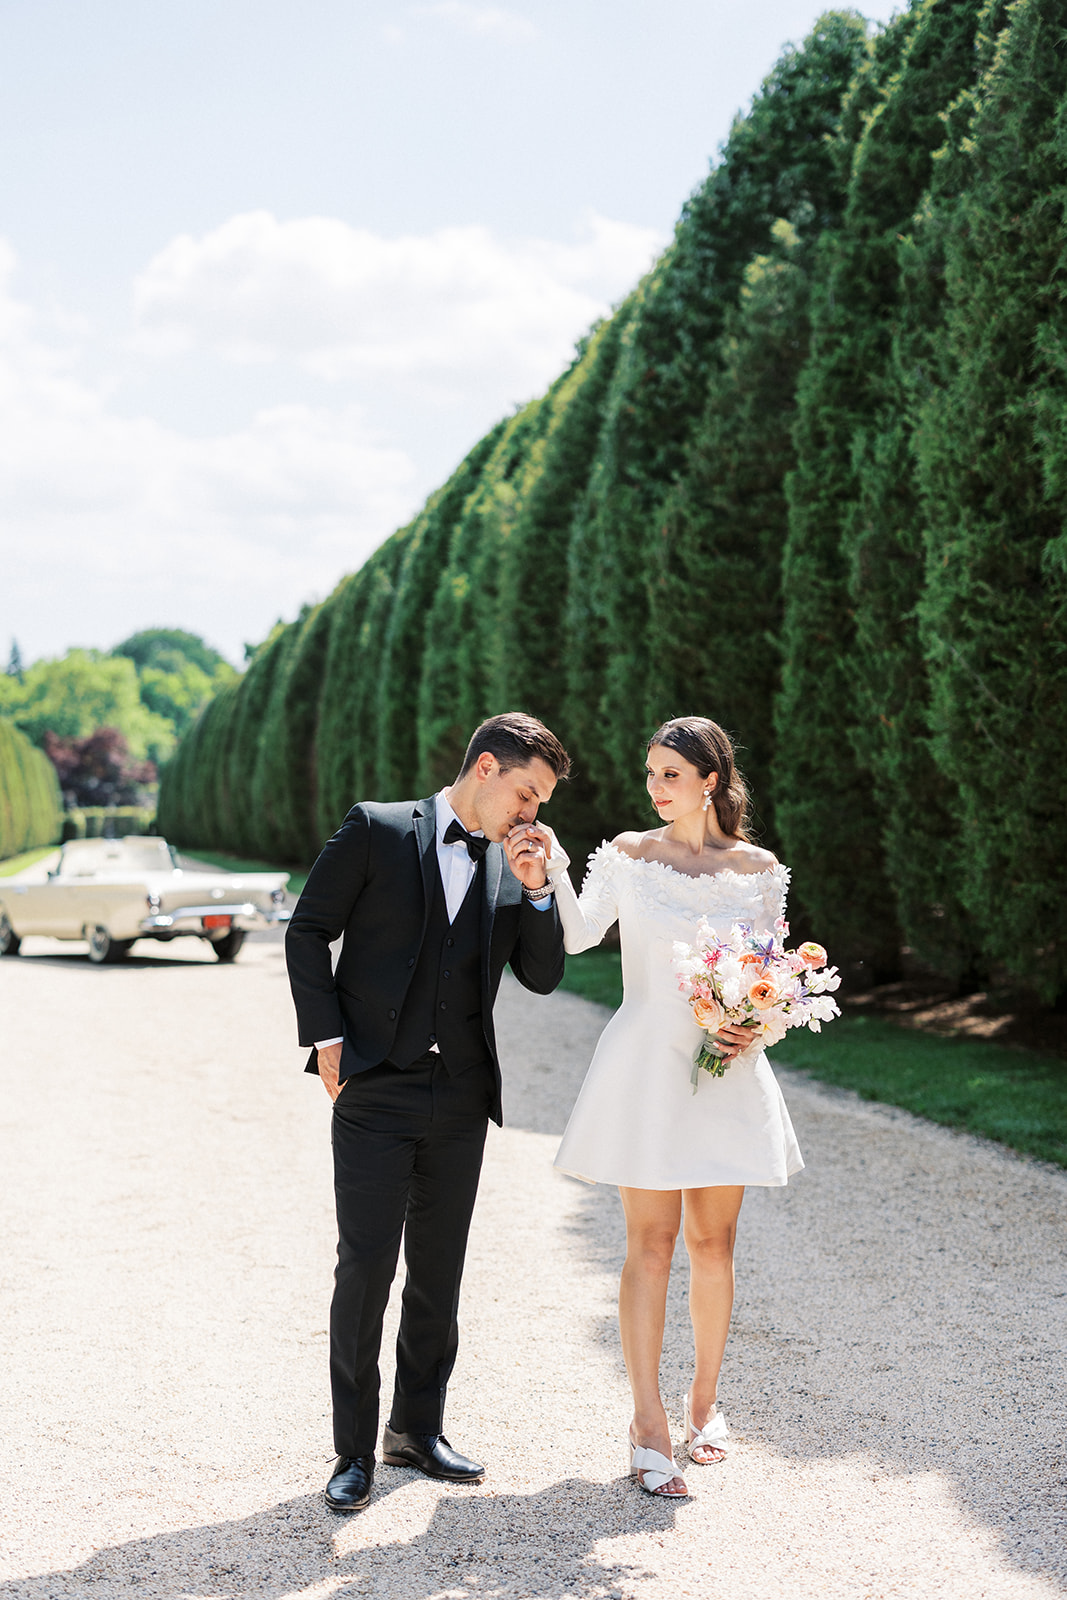 A groom in a black tuxedo kisses the hand of his bride as they walk through a gravel road at the Oheka Castle